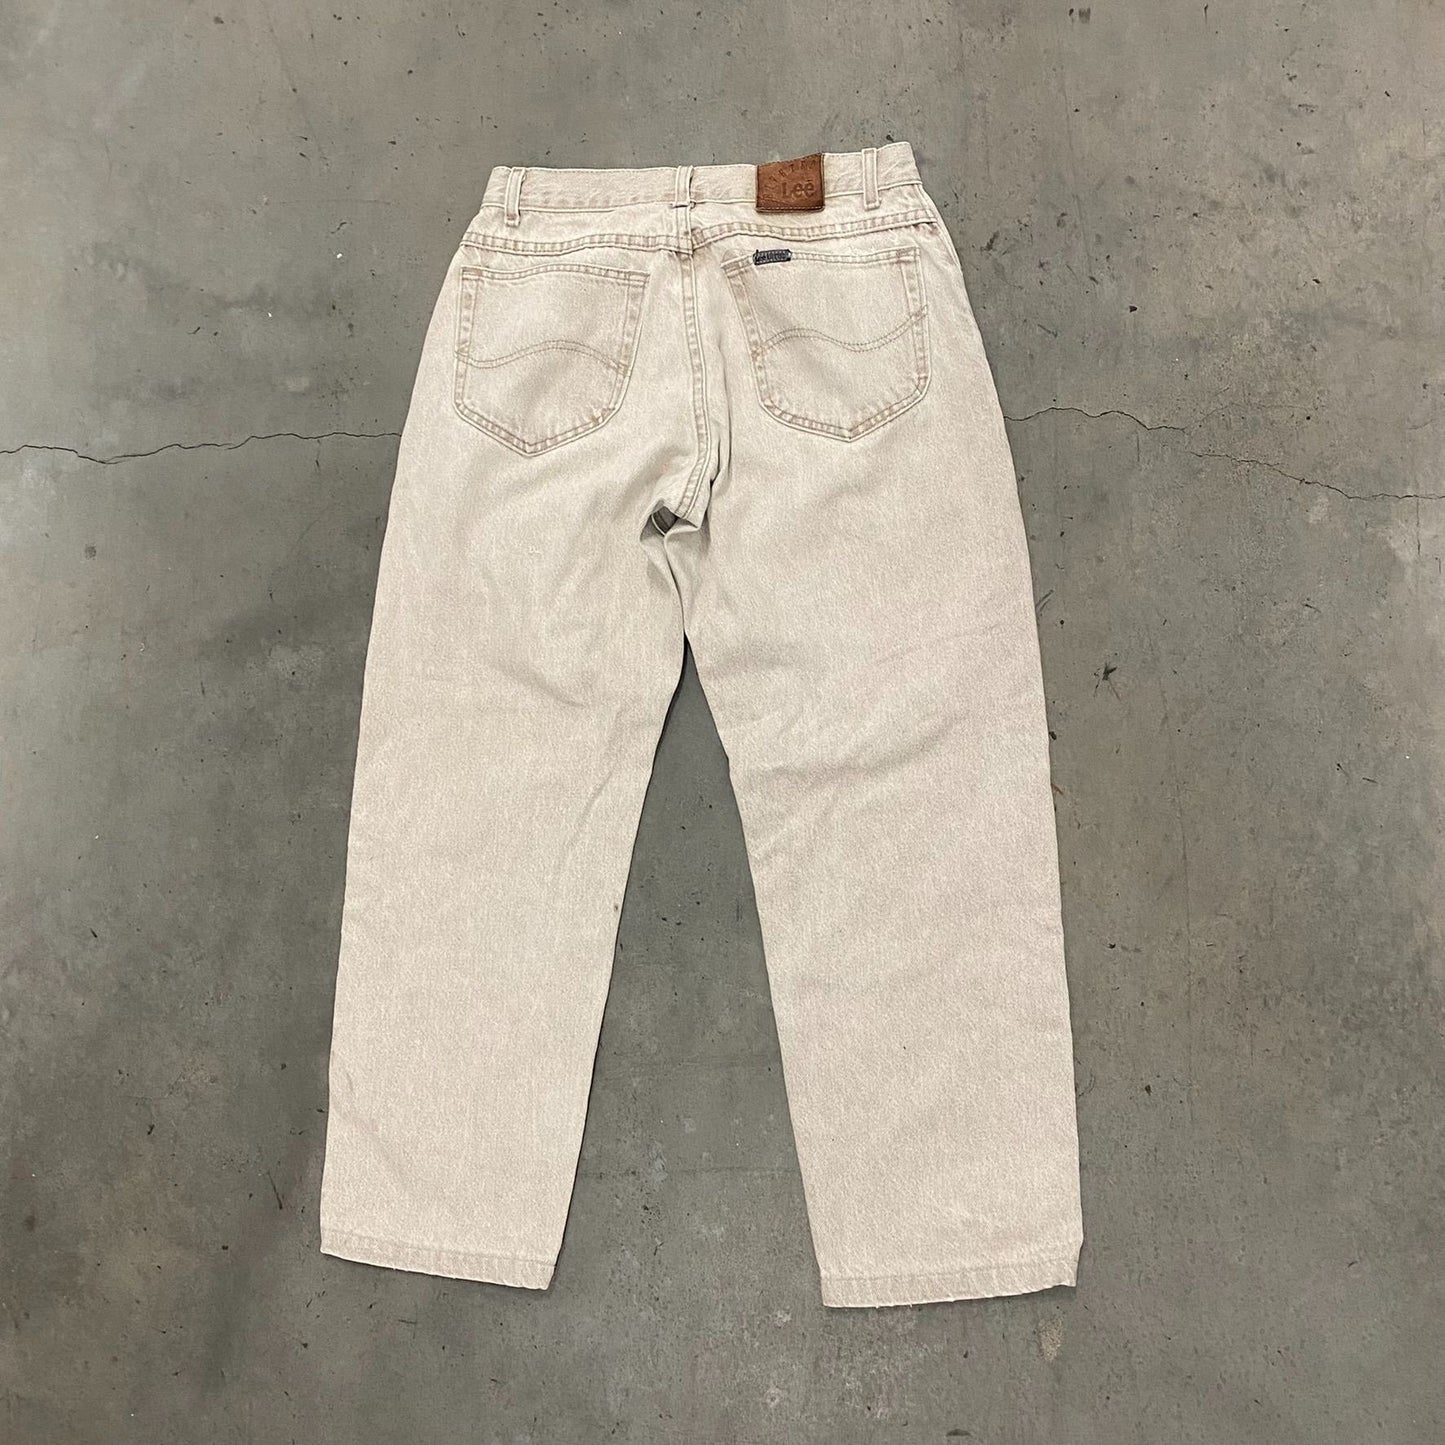 Vintage 90s Lee Gray Denim Baggy Relaxed Tonal Work Jeans